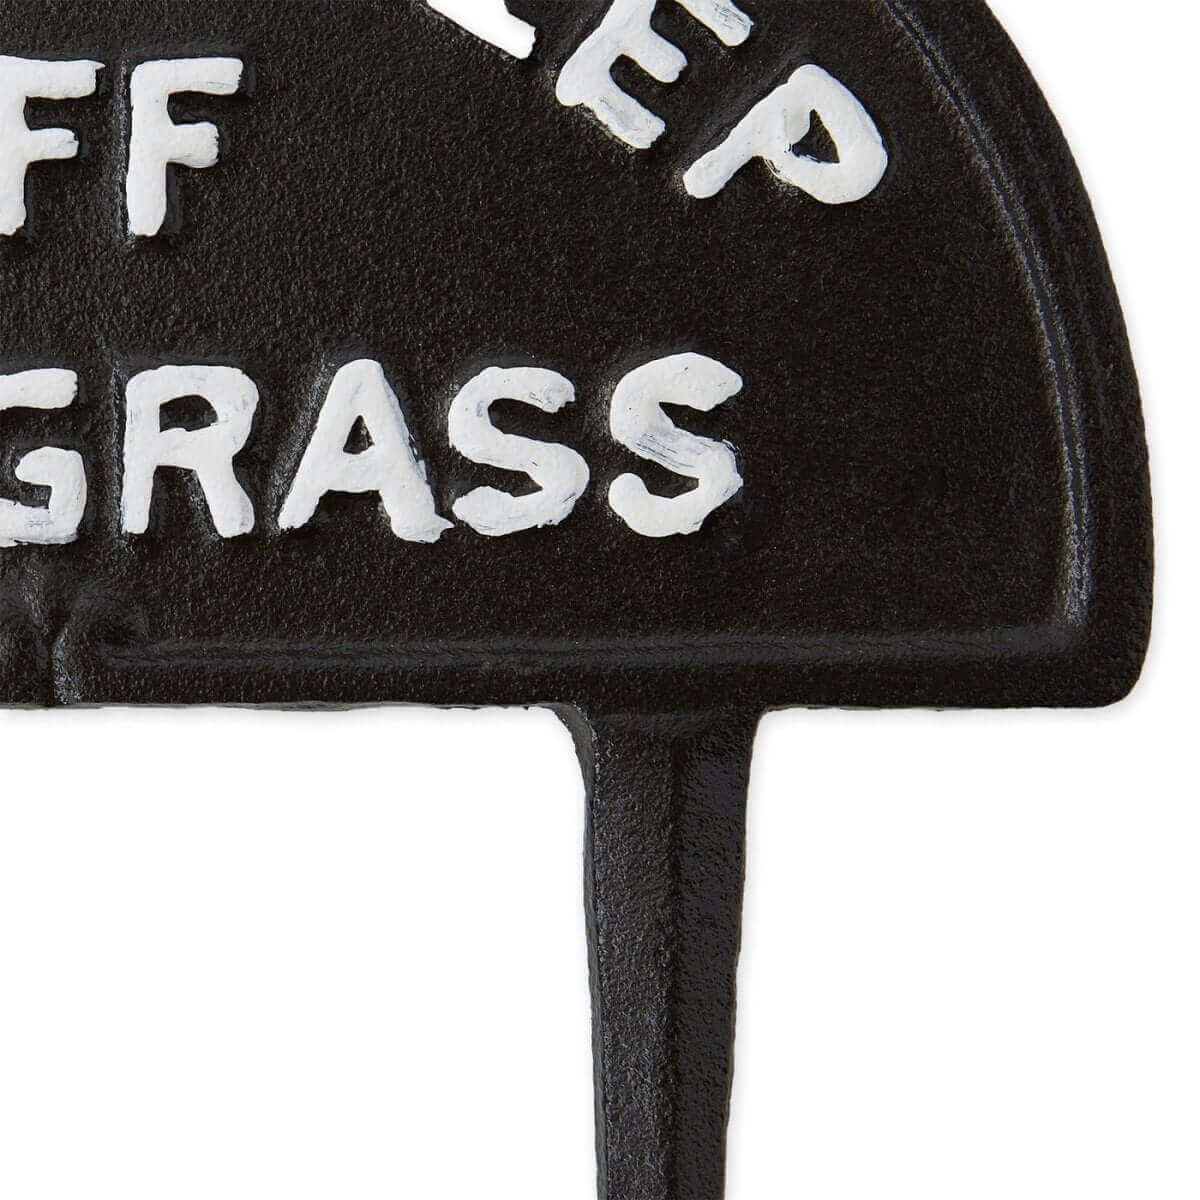 Please Keep Off the Grass Metal Garden Stake - Hearth Home & Living